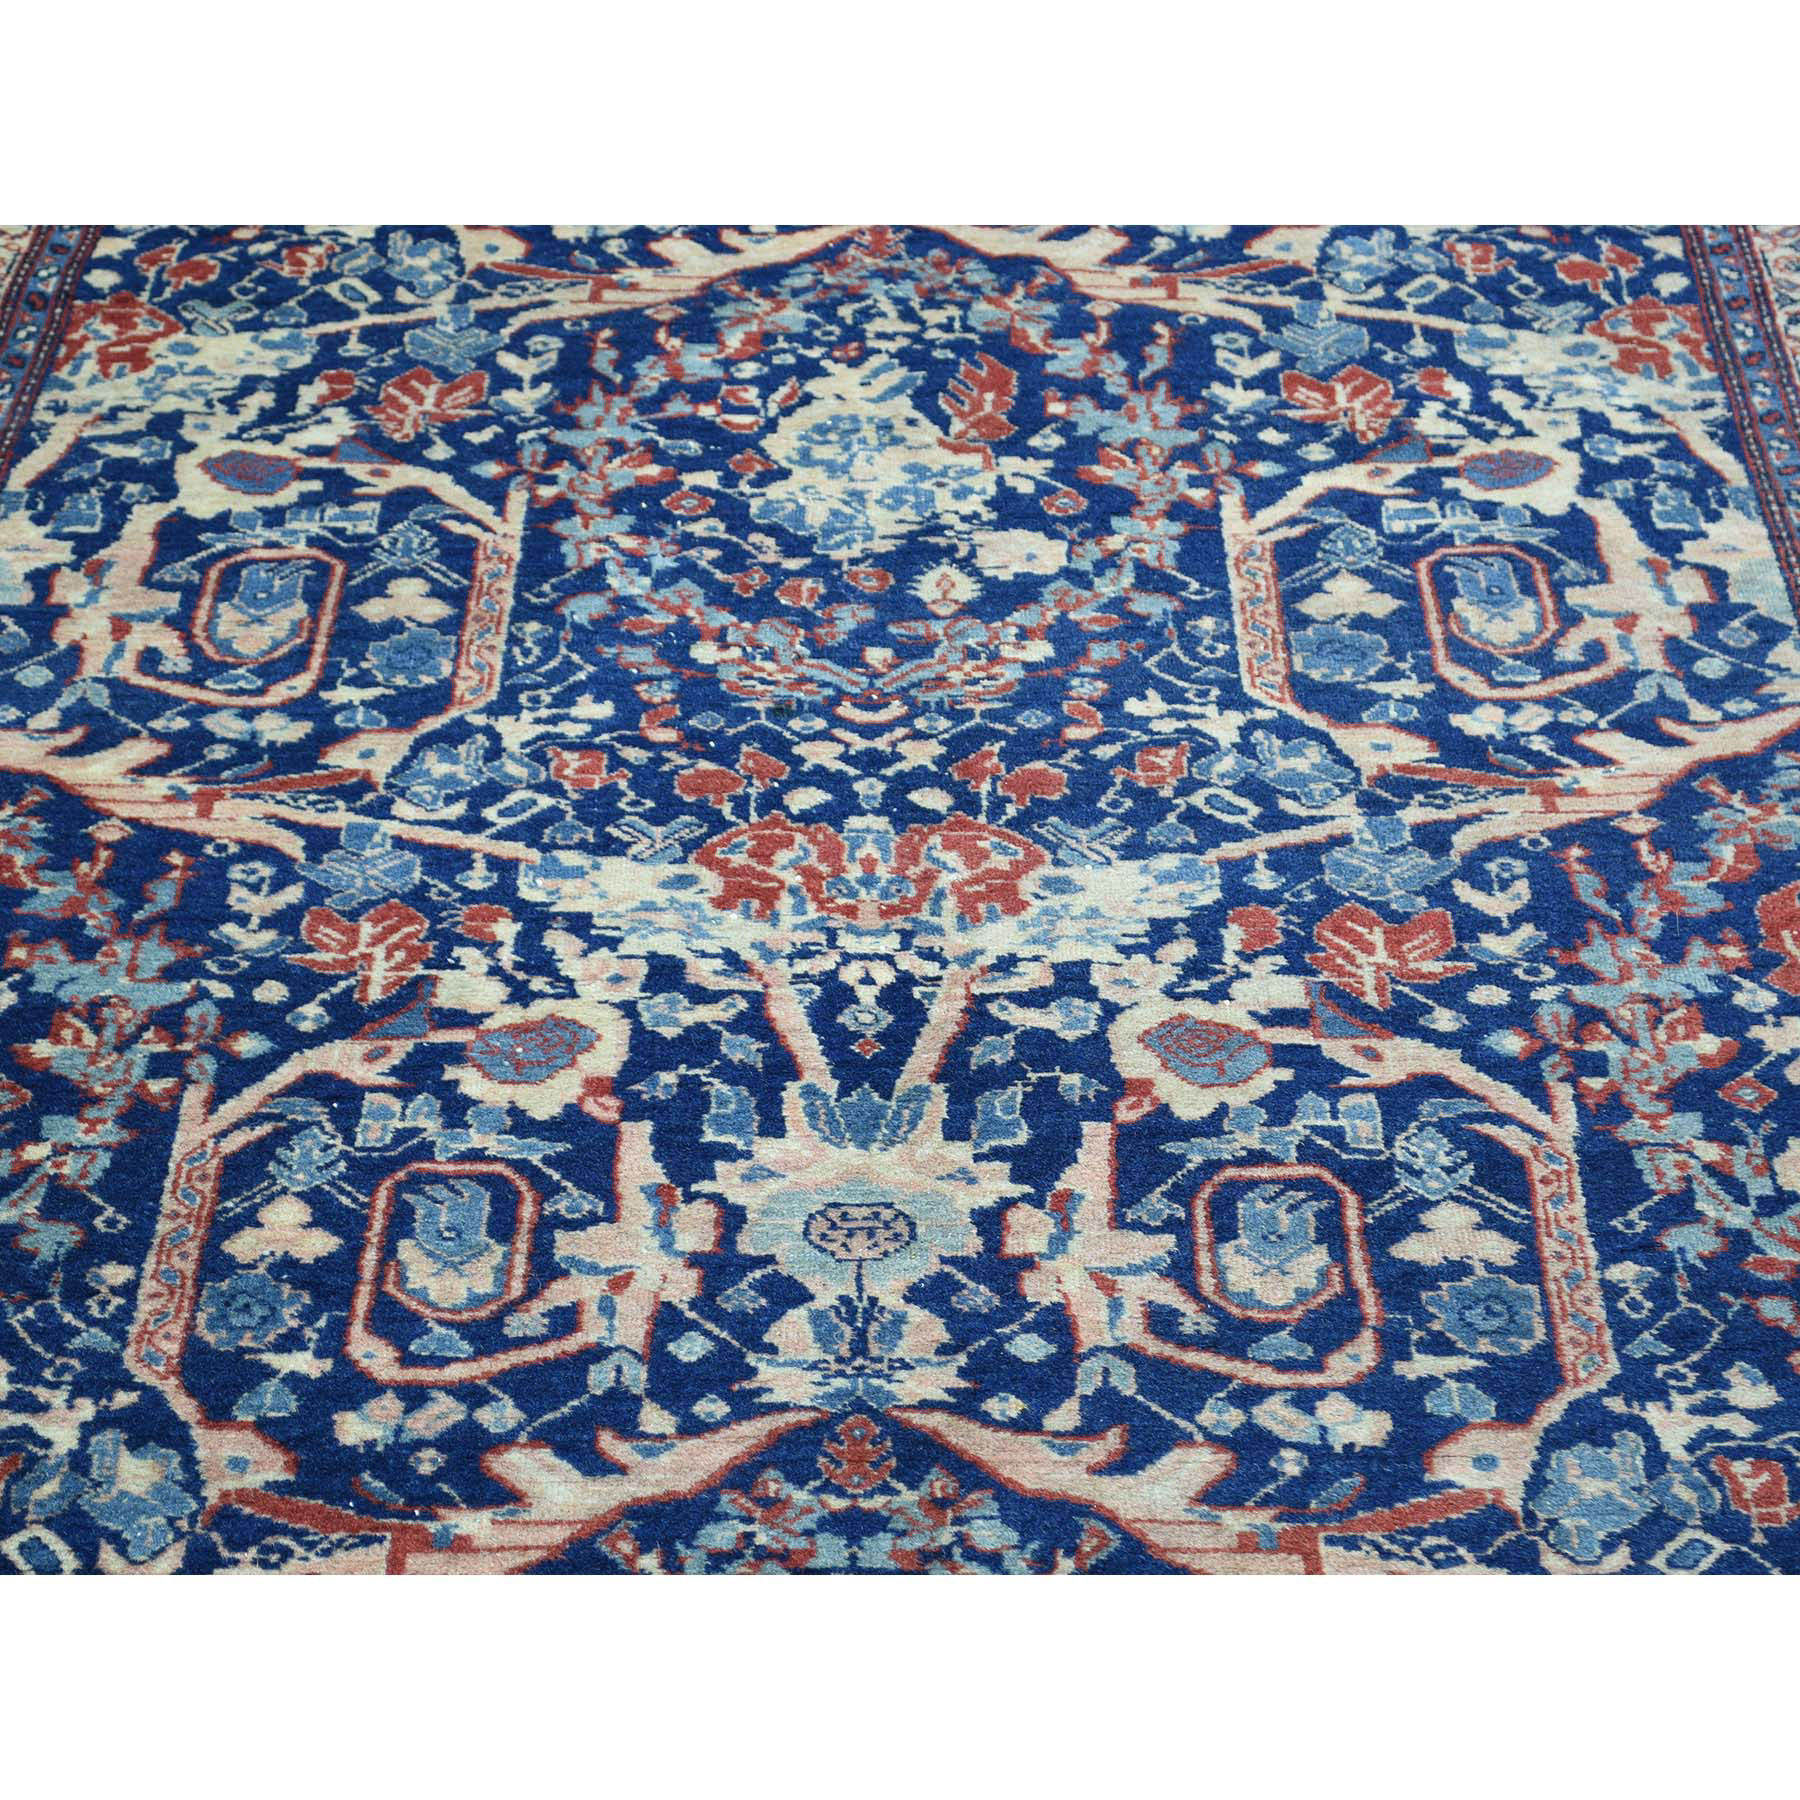 4-6 x6-3  Hand-Knotted Antique Persian Tabriz Navy Blue Full Pile Rug 